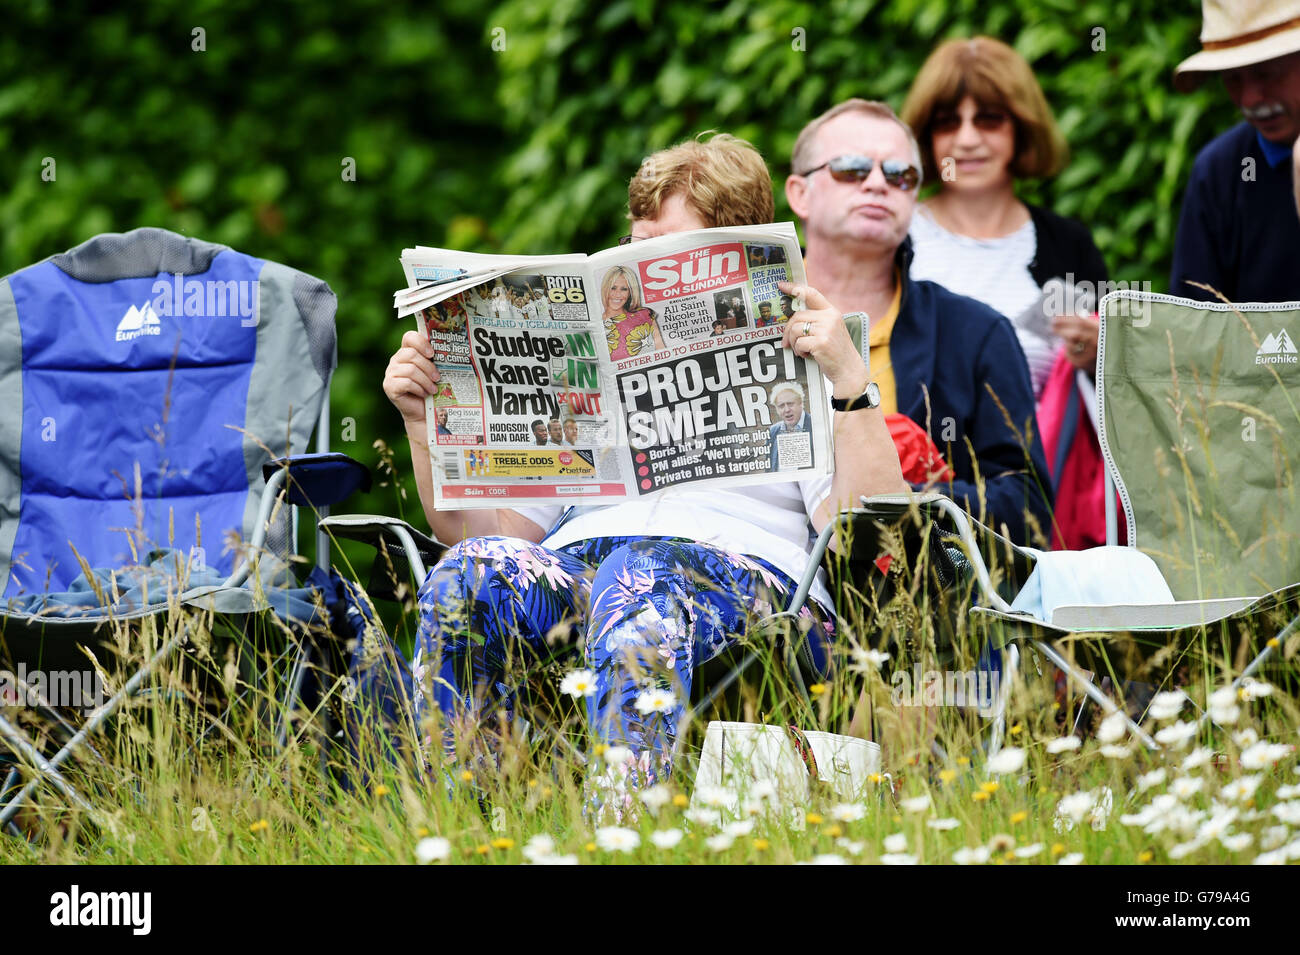 Arundel West Sussex UK 26th June 2016 - A woman reads the Sun on Sunday newspaper at Arundel in warm sunny weather today after the vote to leave the European Union has left Britain spilt  Credit:  Simon Dack/Alamy Live News Stock Photo